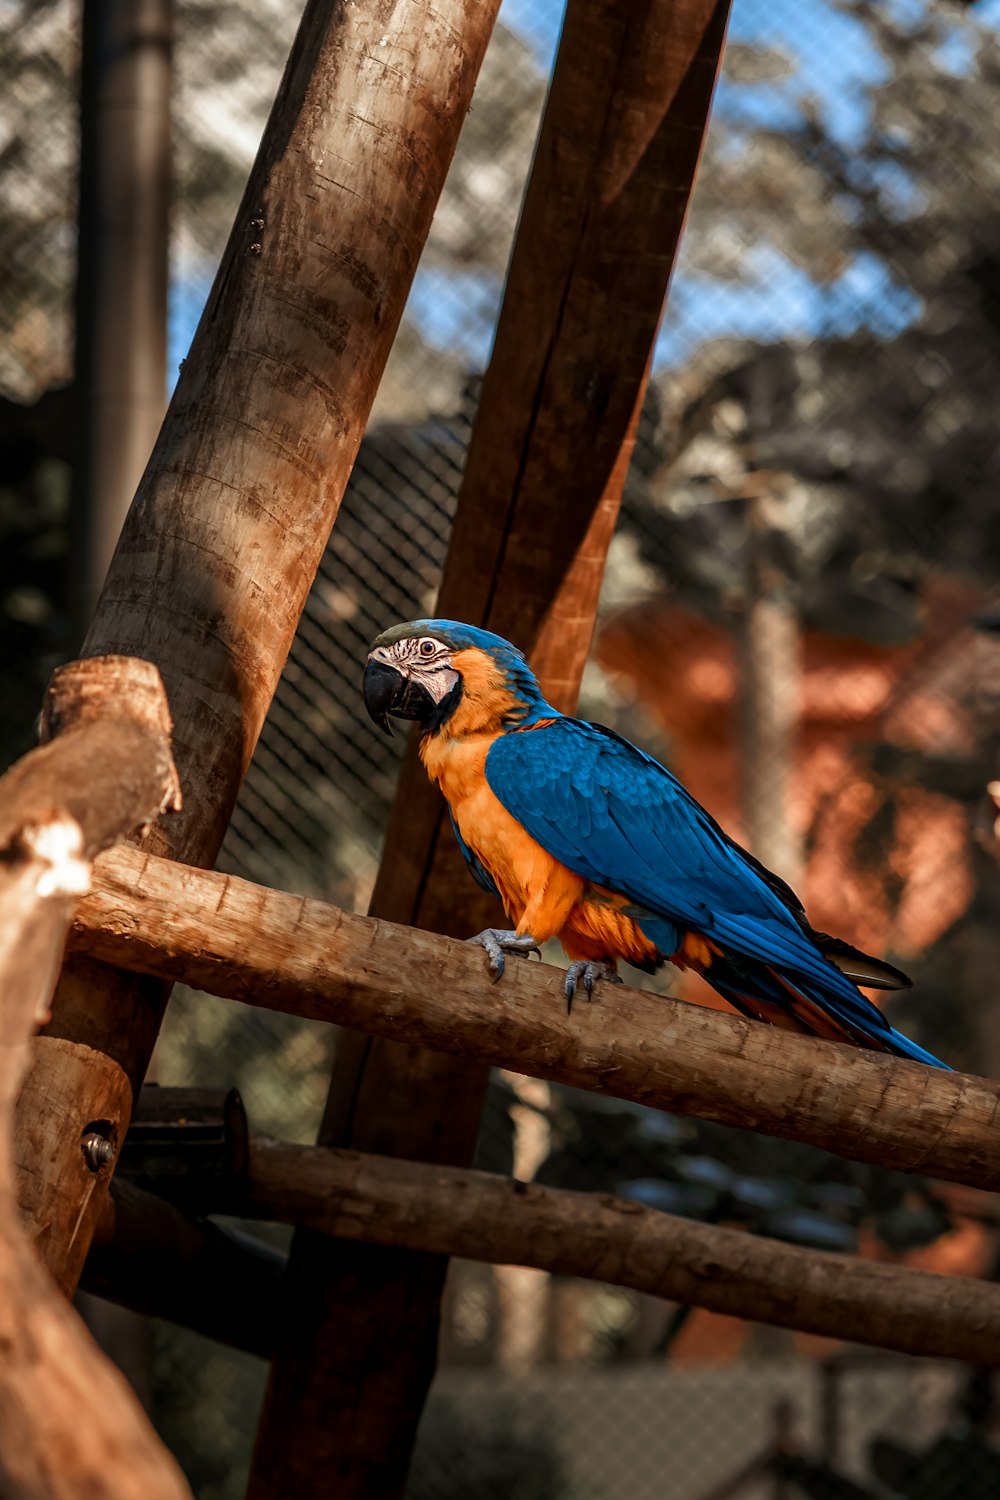 a blue and orange parrot sitting on a wooden perch